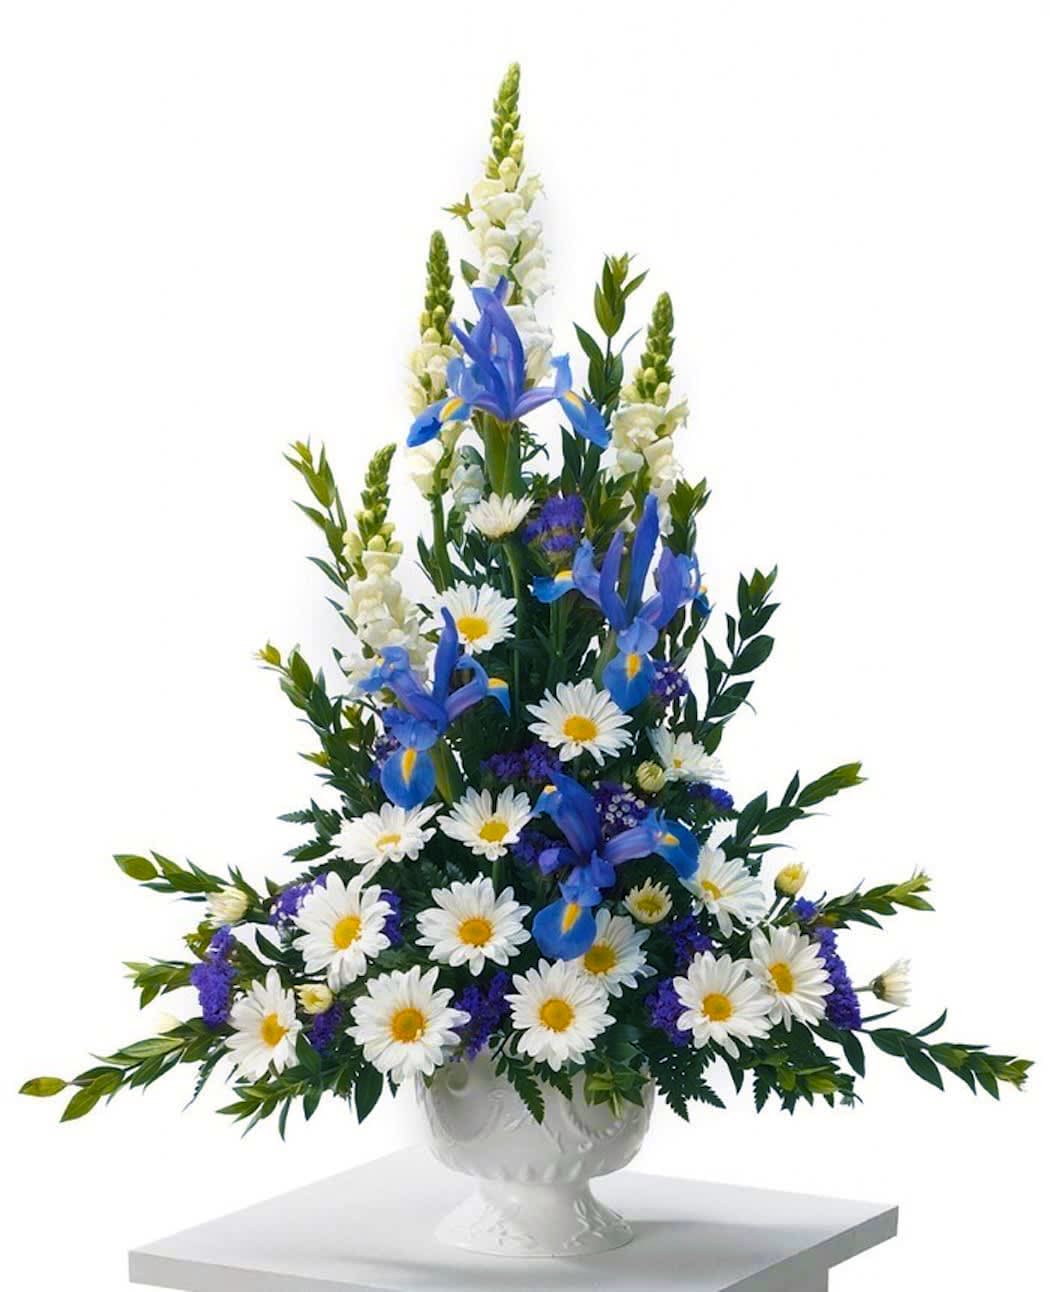 Heavens Rise  - Pedestal arrangement including snapdragons, daisies, iris and statice. Simply beautiful for any type of sympathy services.